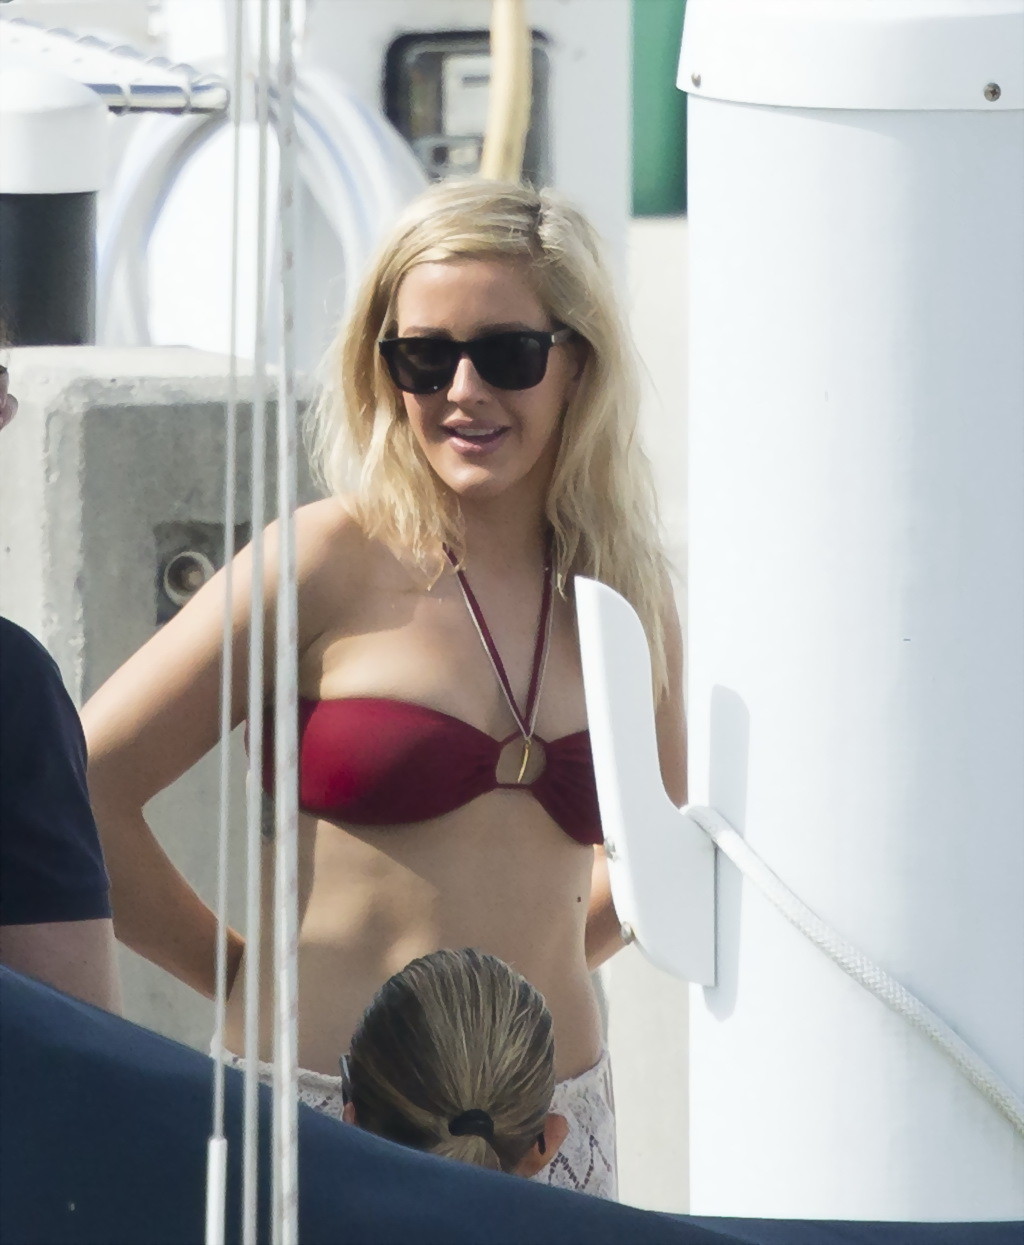 Ellie Goulding showing her ass in skimpy cherry colored bikini at the boat in Mi #75177175